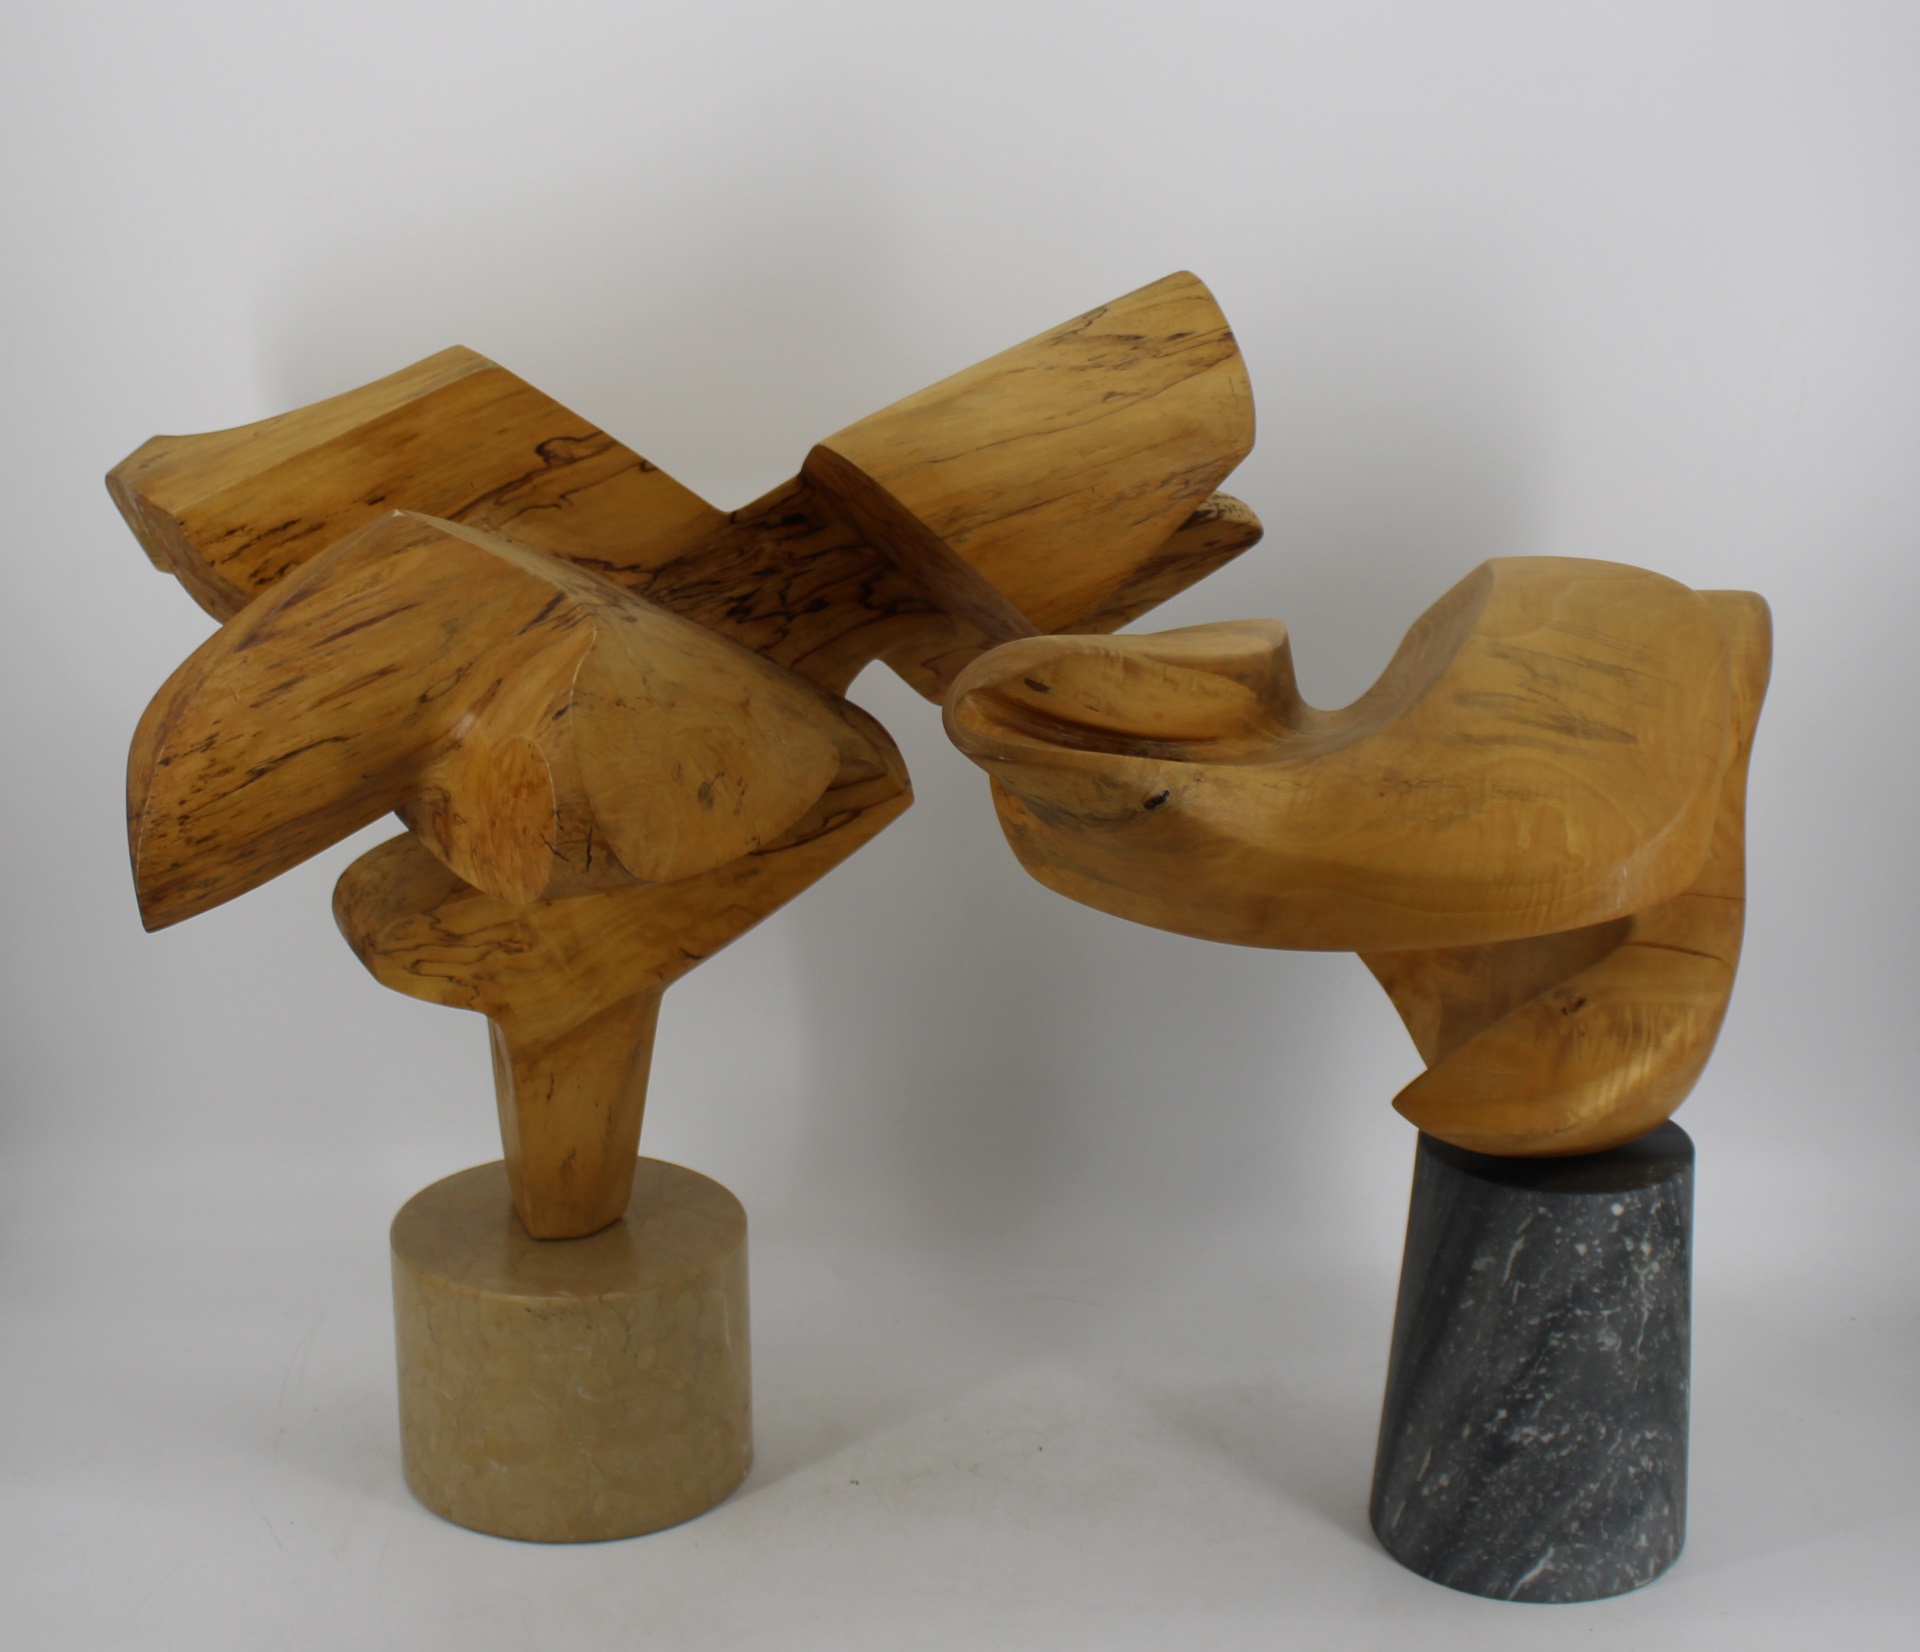 2 MIDCENTURY WOOD ABSTRACT SCULPTURES